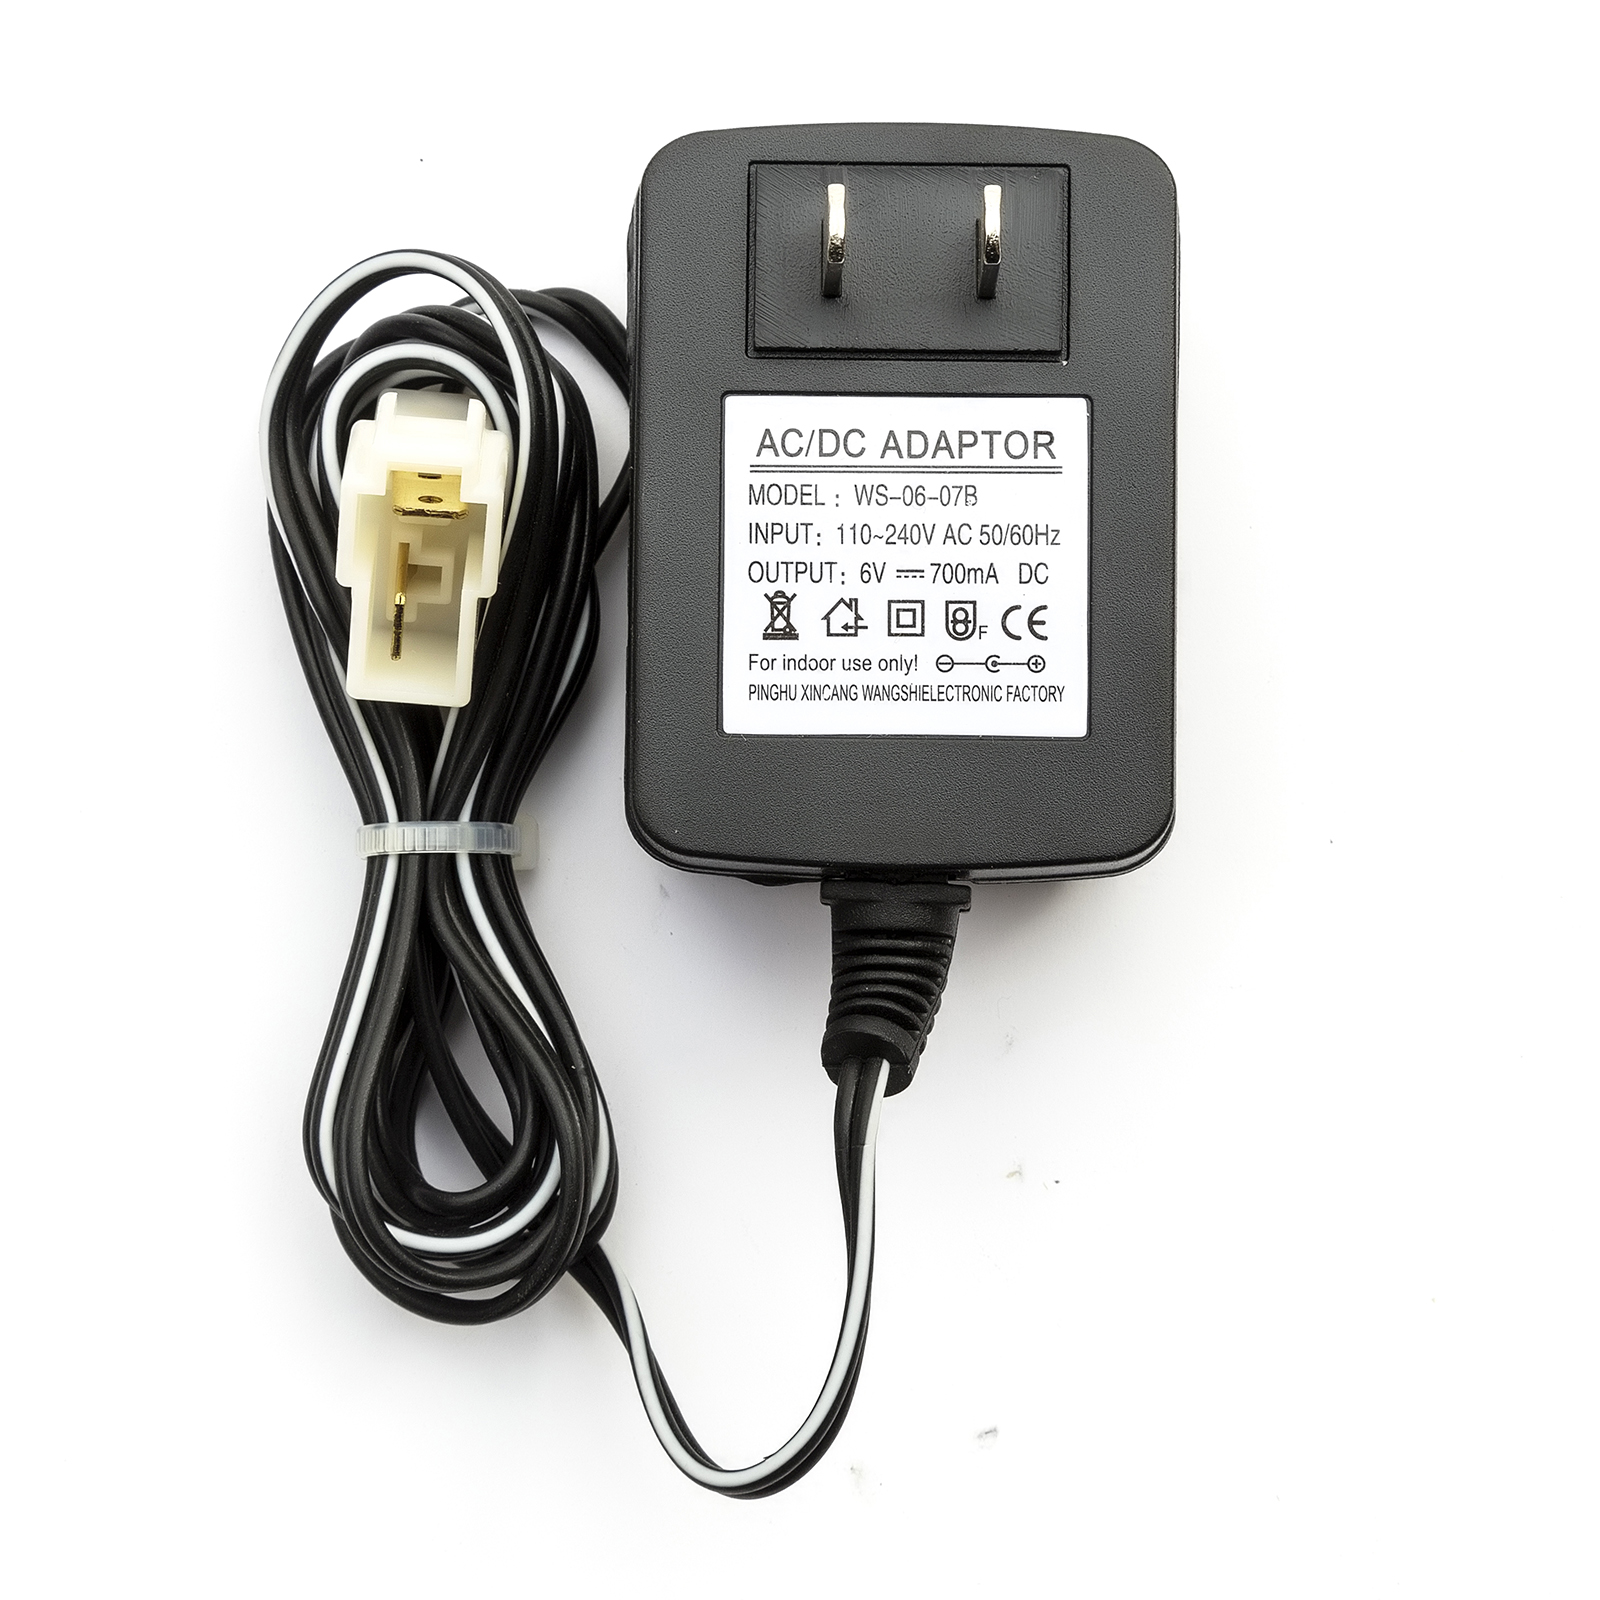 6 volt battery charger for roll play truck